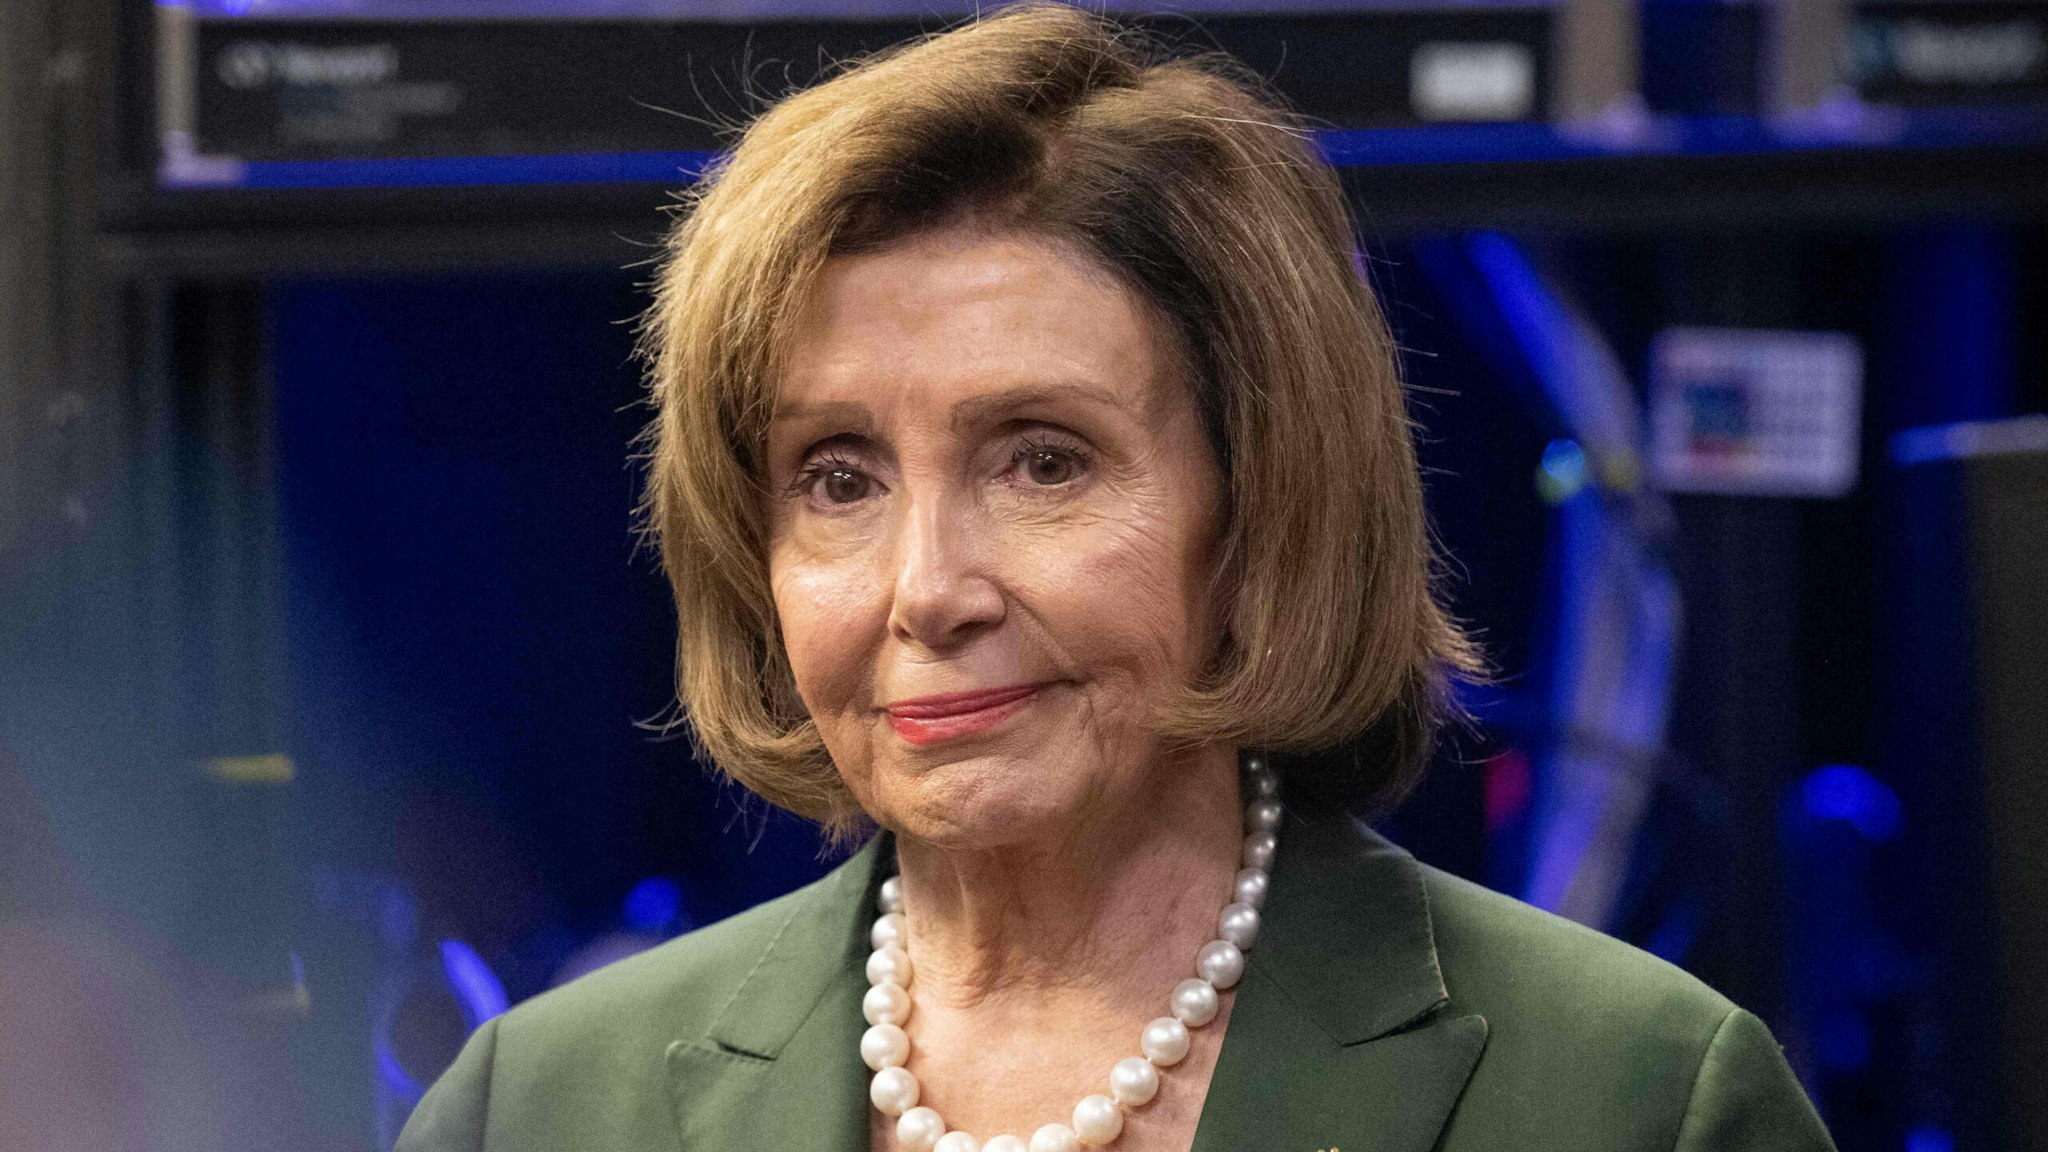 Speaker of the House Nancy Pelosi speaks with scientists at the SLAC National Accelerator Laboratory in Menlo Park, California on October 17, 2022.